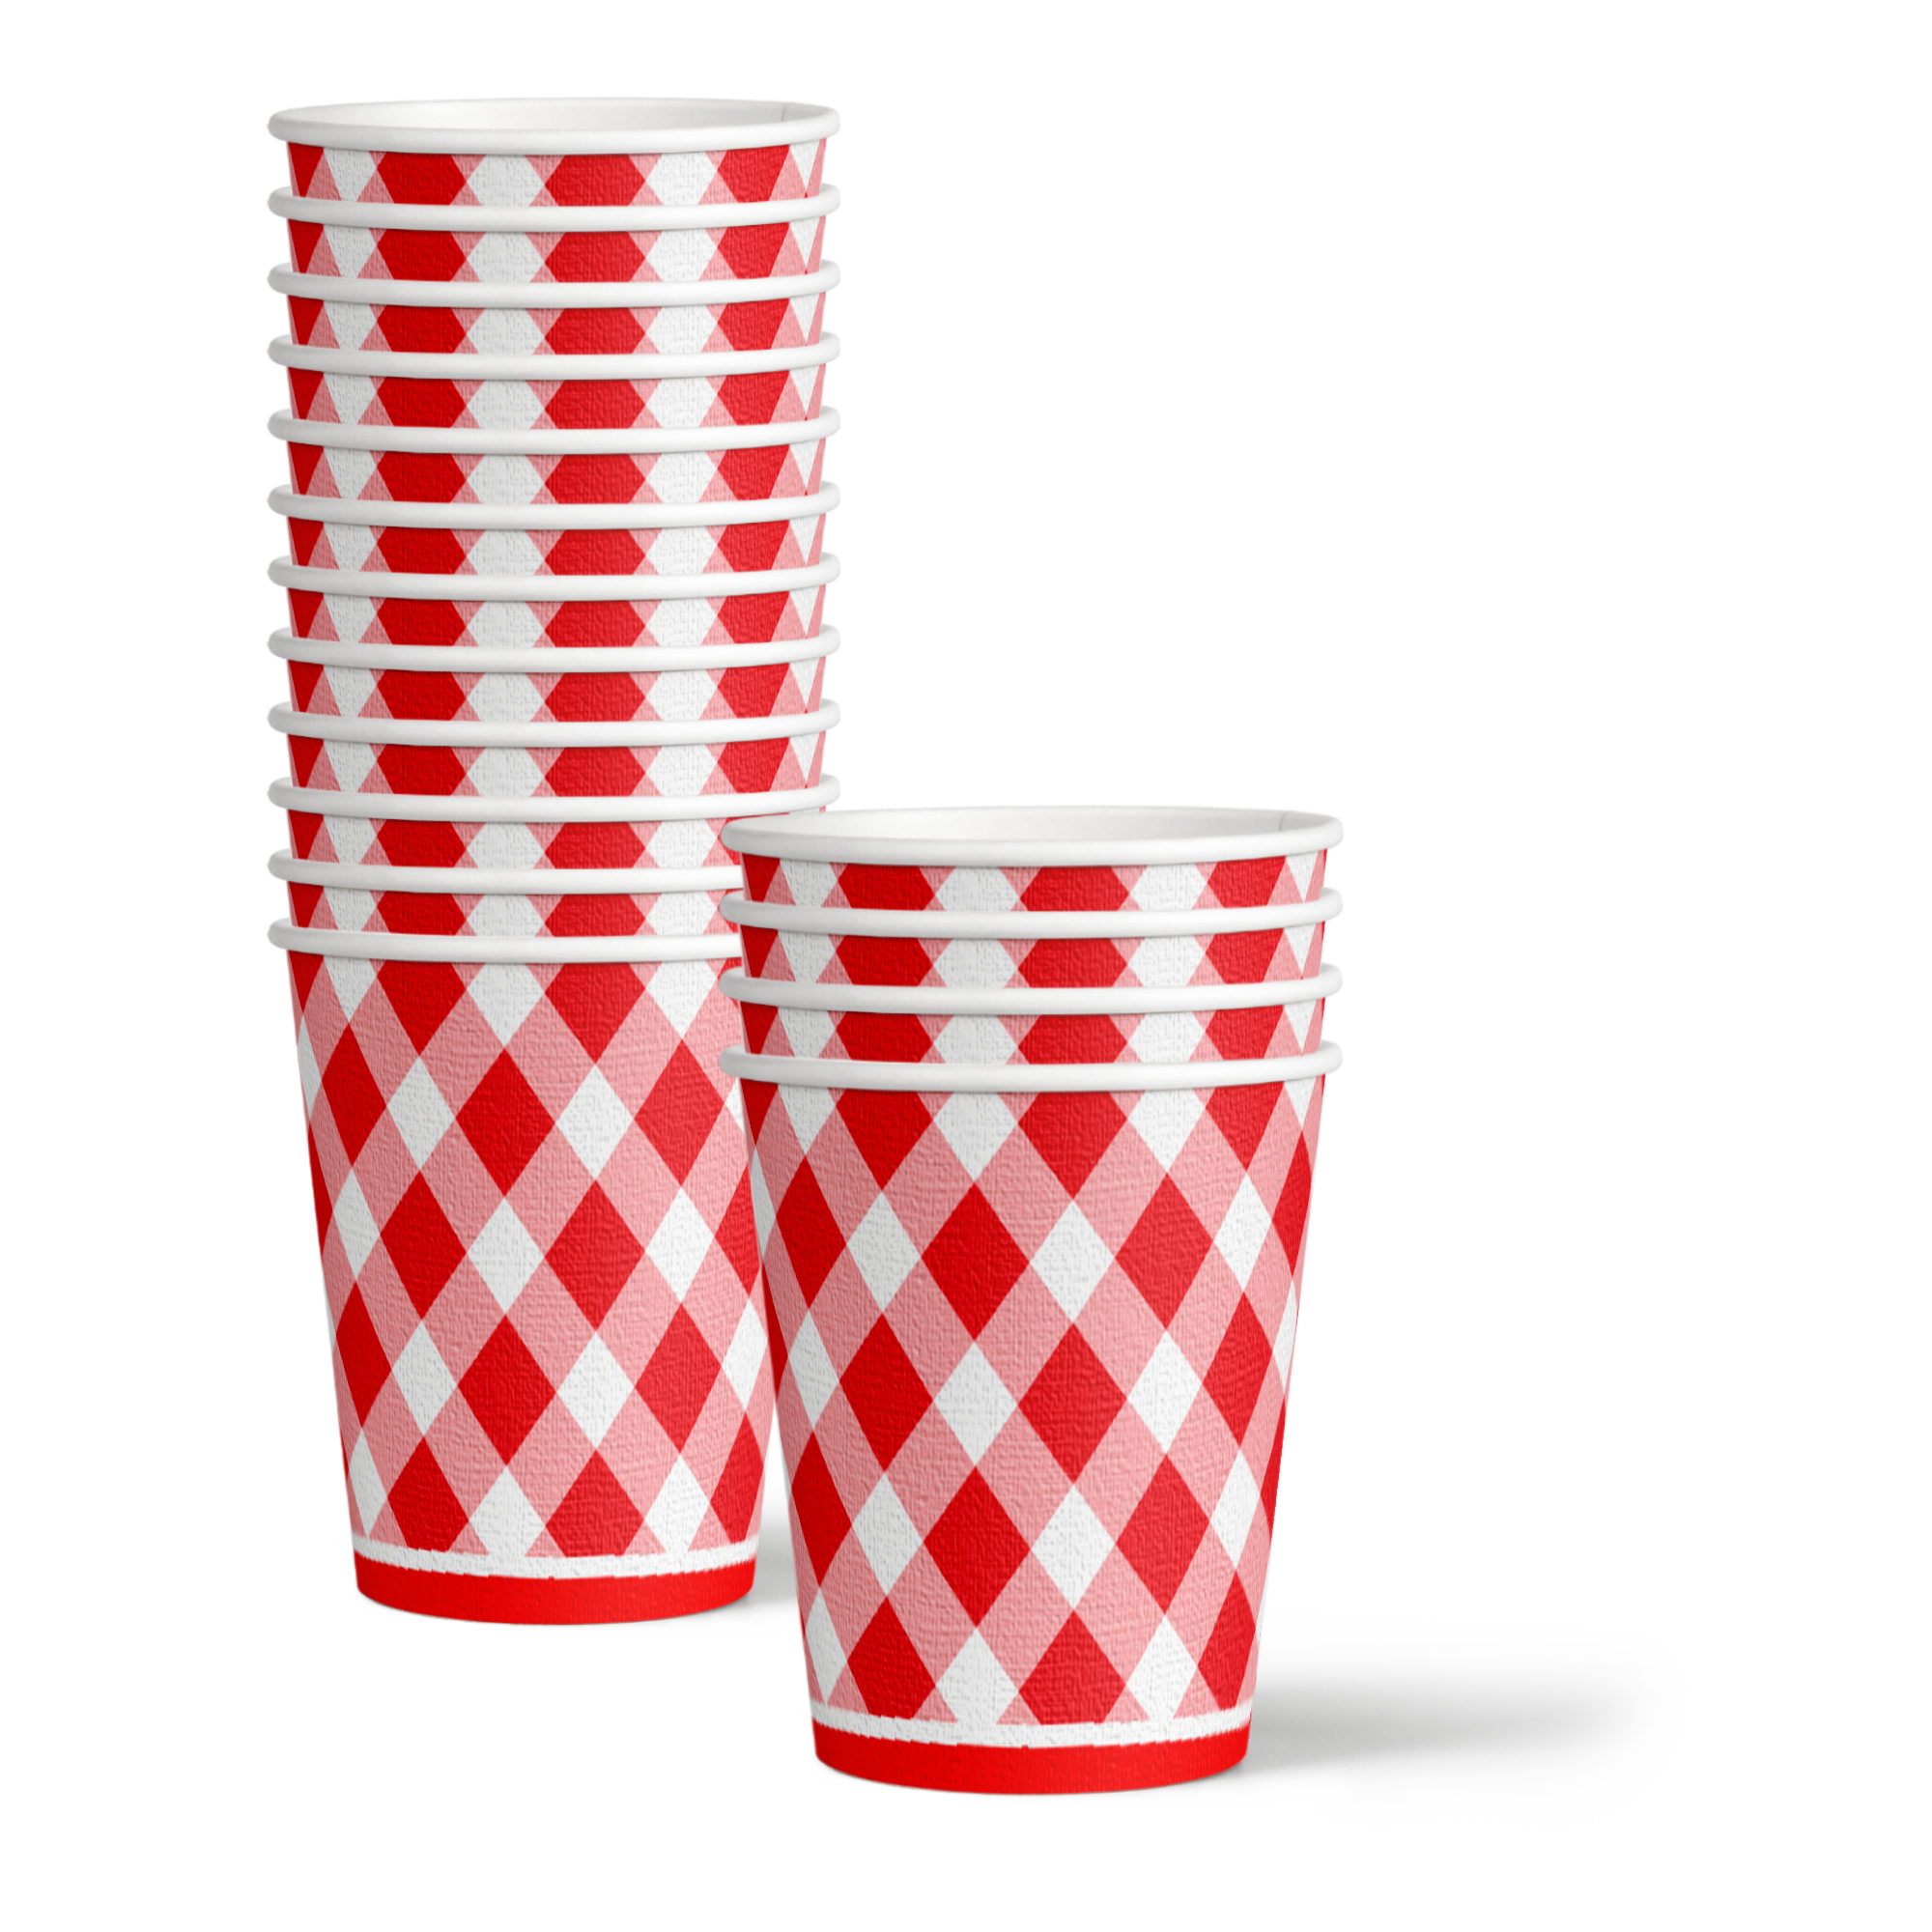 Red Gingham Picnic/BBQ Birthday Party Tableware Kit For 16 Guests